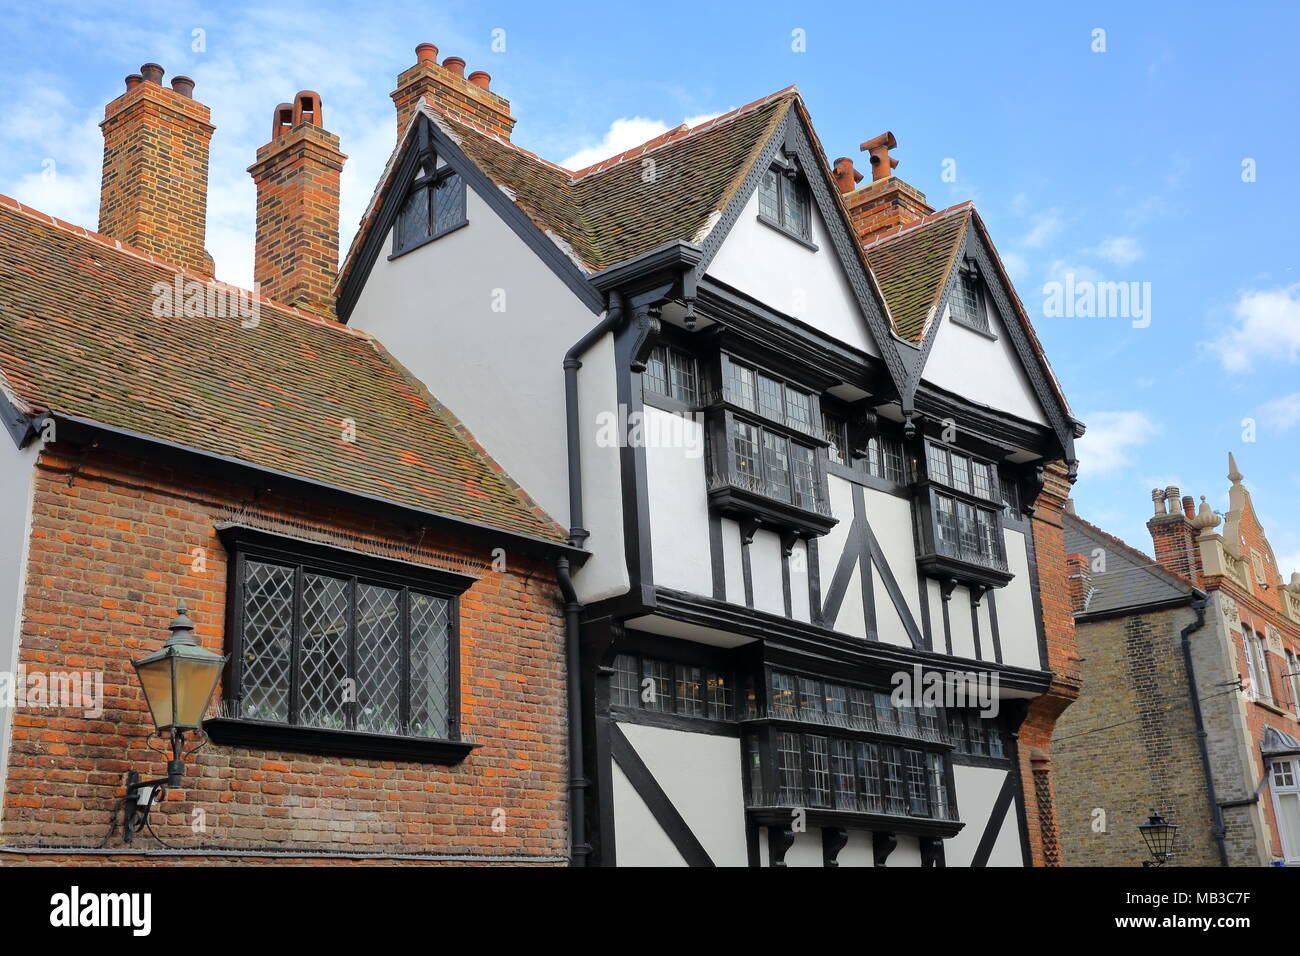 ROCHESTER, UK - MARCH 23, 2018: Historic Eastgate House on High Street Stock Photo